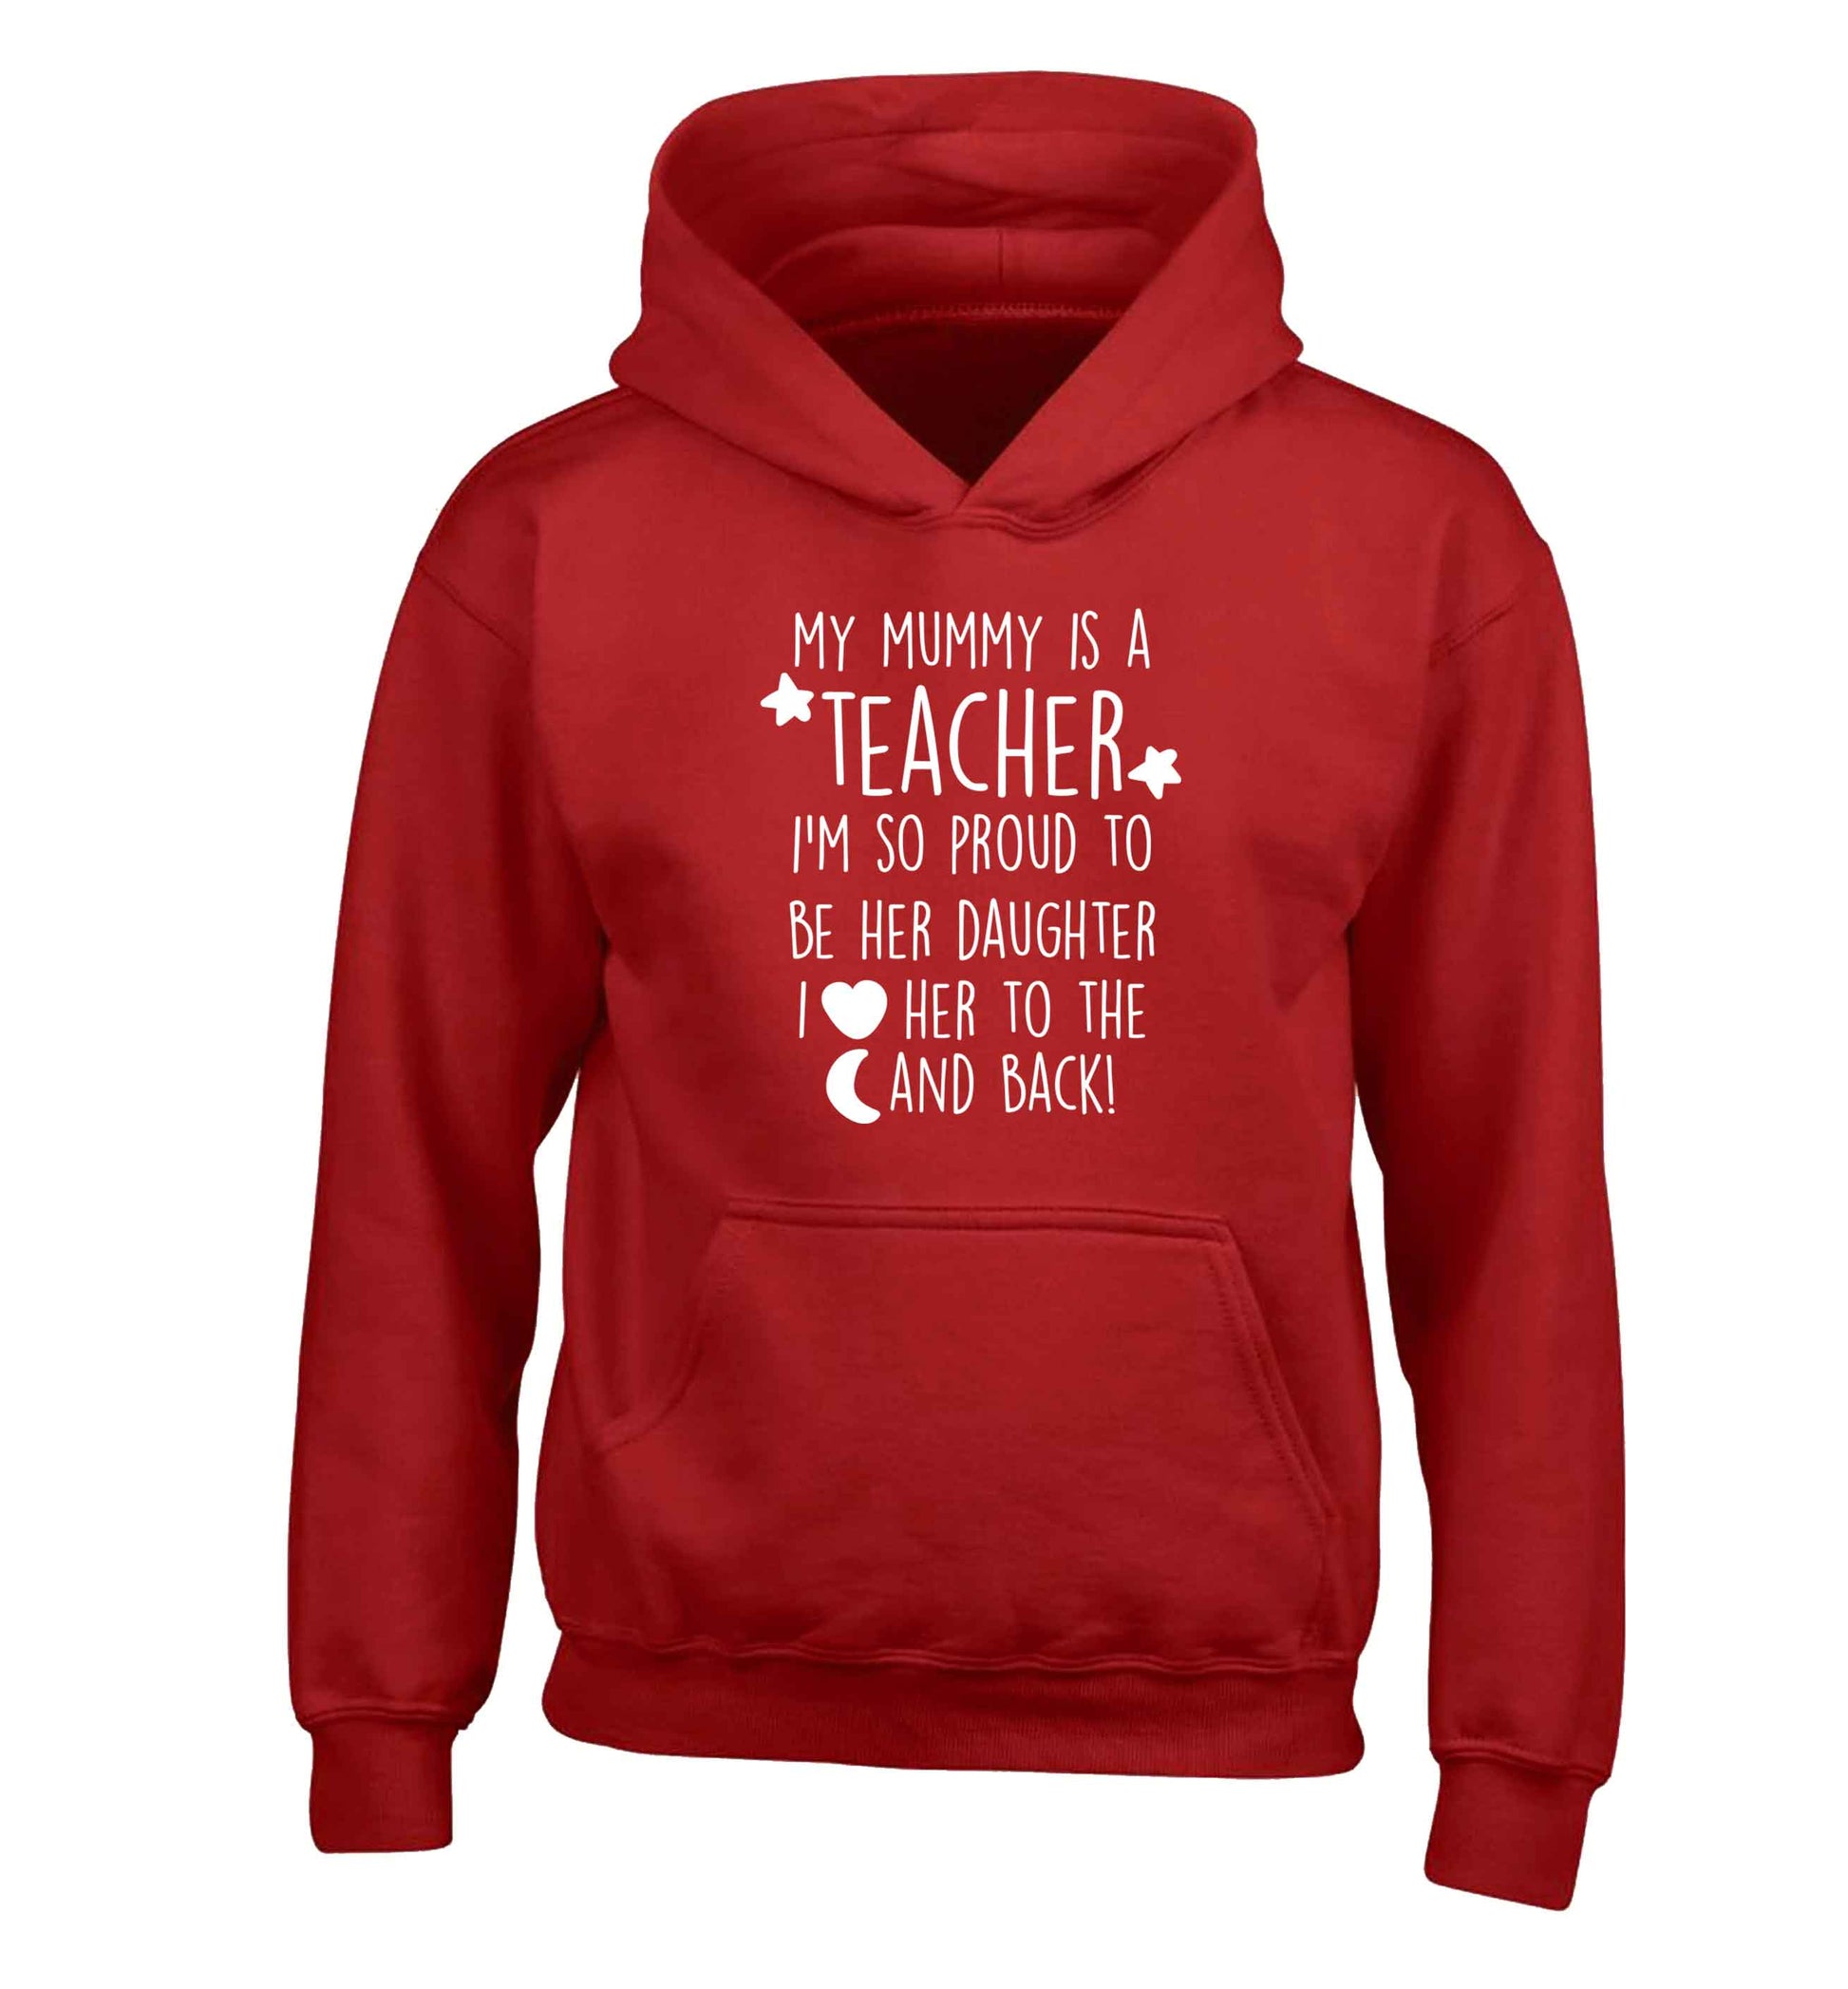 My mummy is a teacher I'm so proud to be her daughter I love her to the moon and back children's red hoodie 12-13 Years